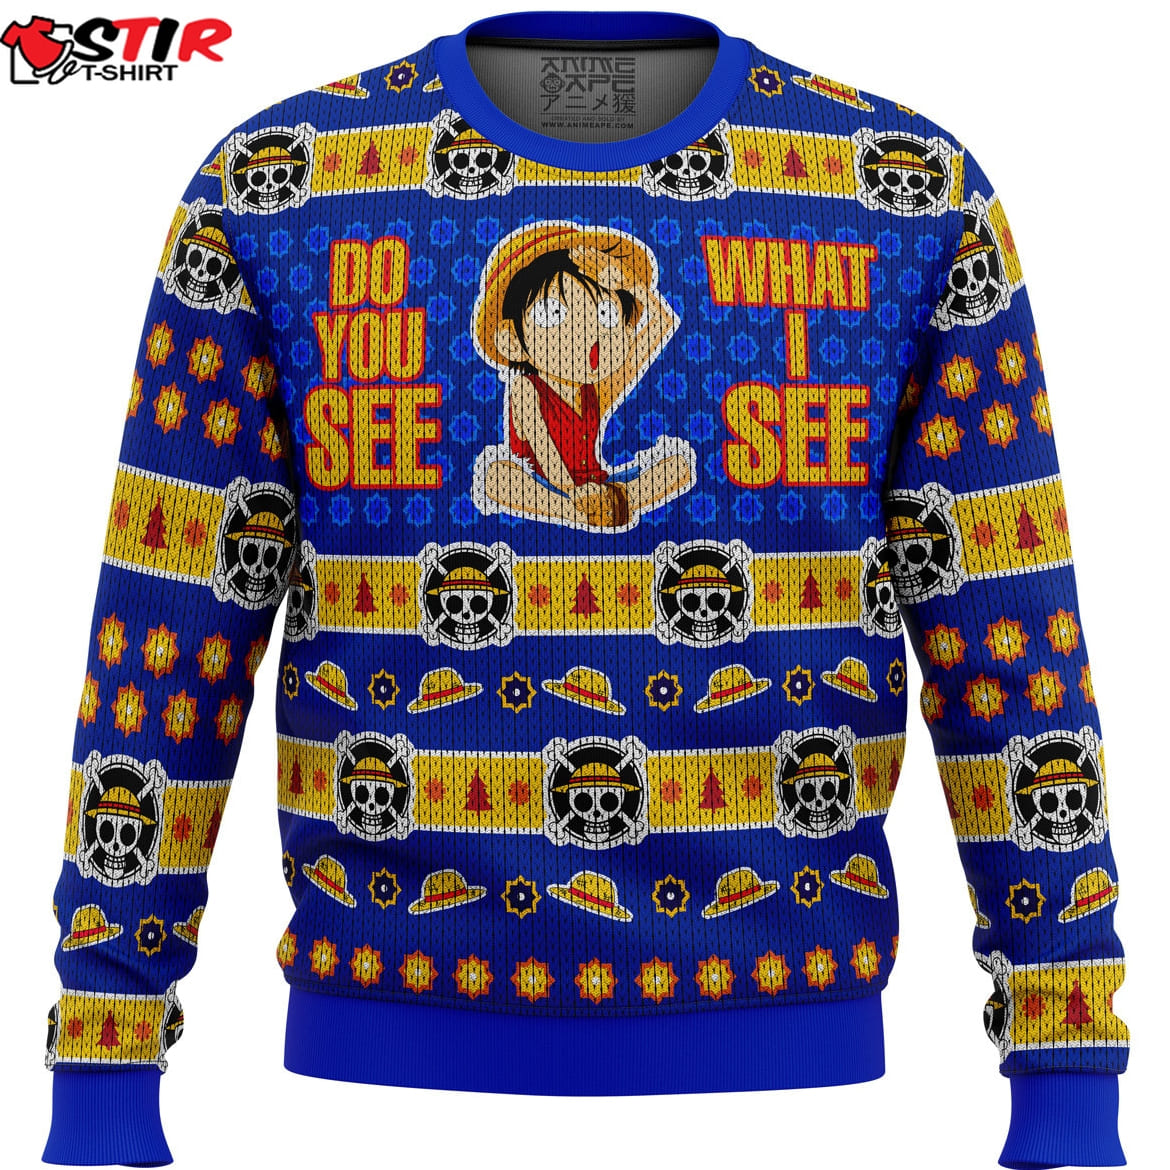 Do You See What I See Monkey D Luffy One Piece Ugly Christmas Sweater Stirtshirt